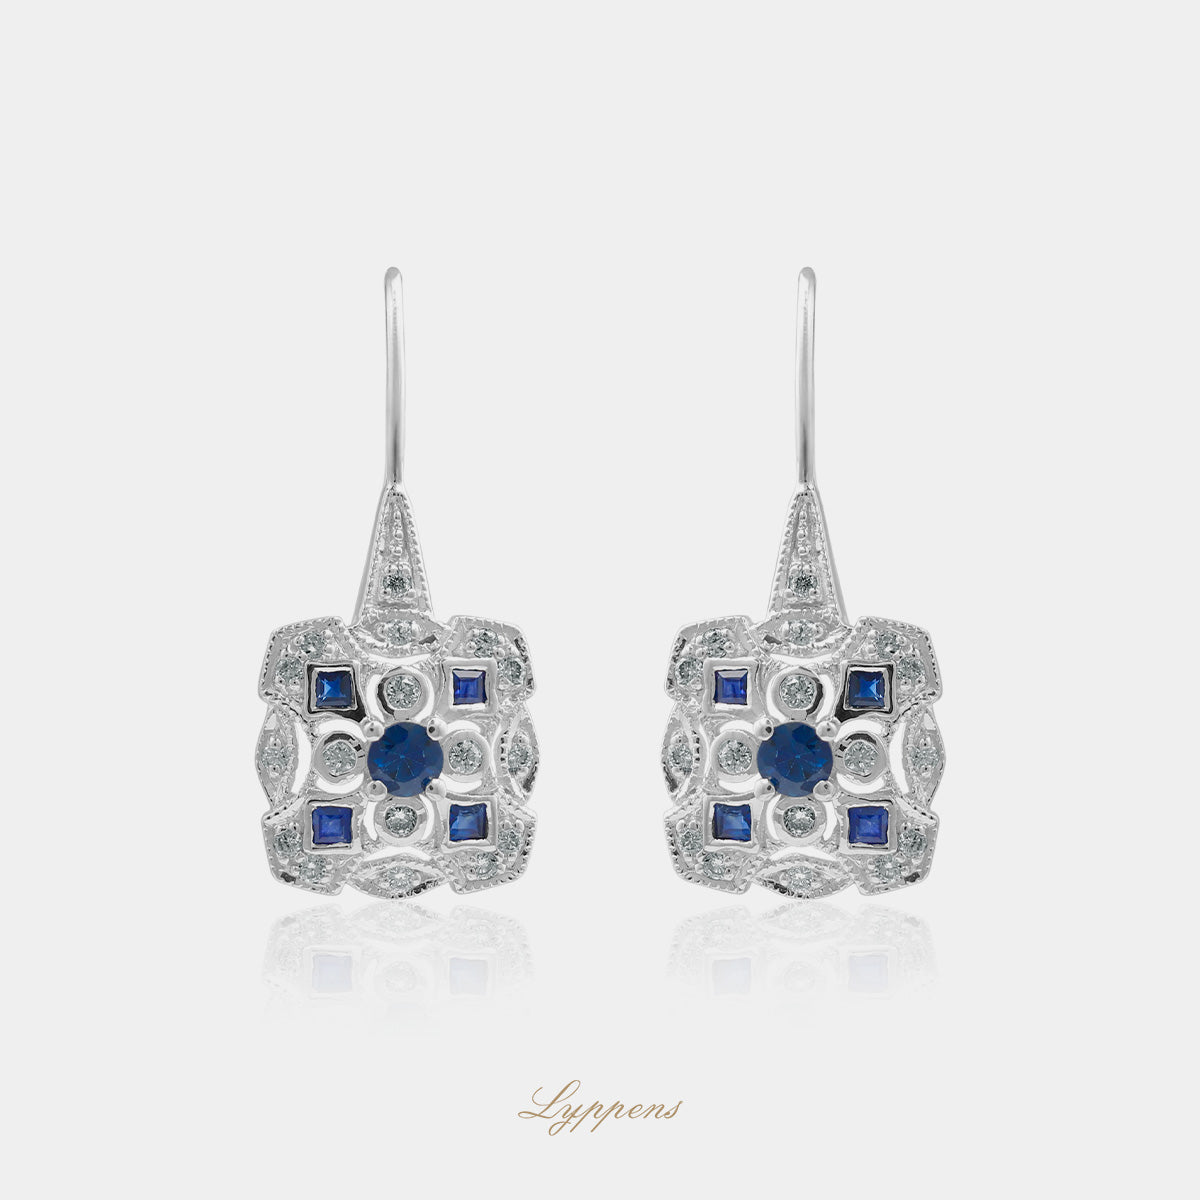 White gold drop earrings with sapphire and diamonds